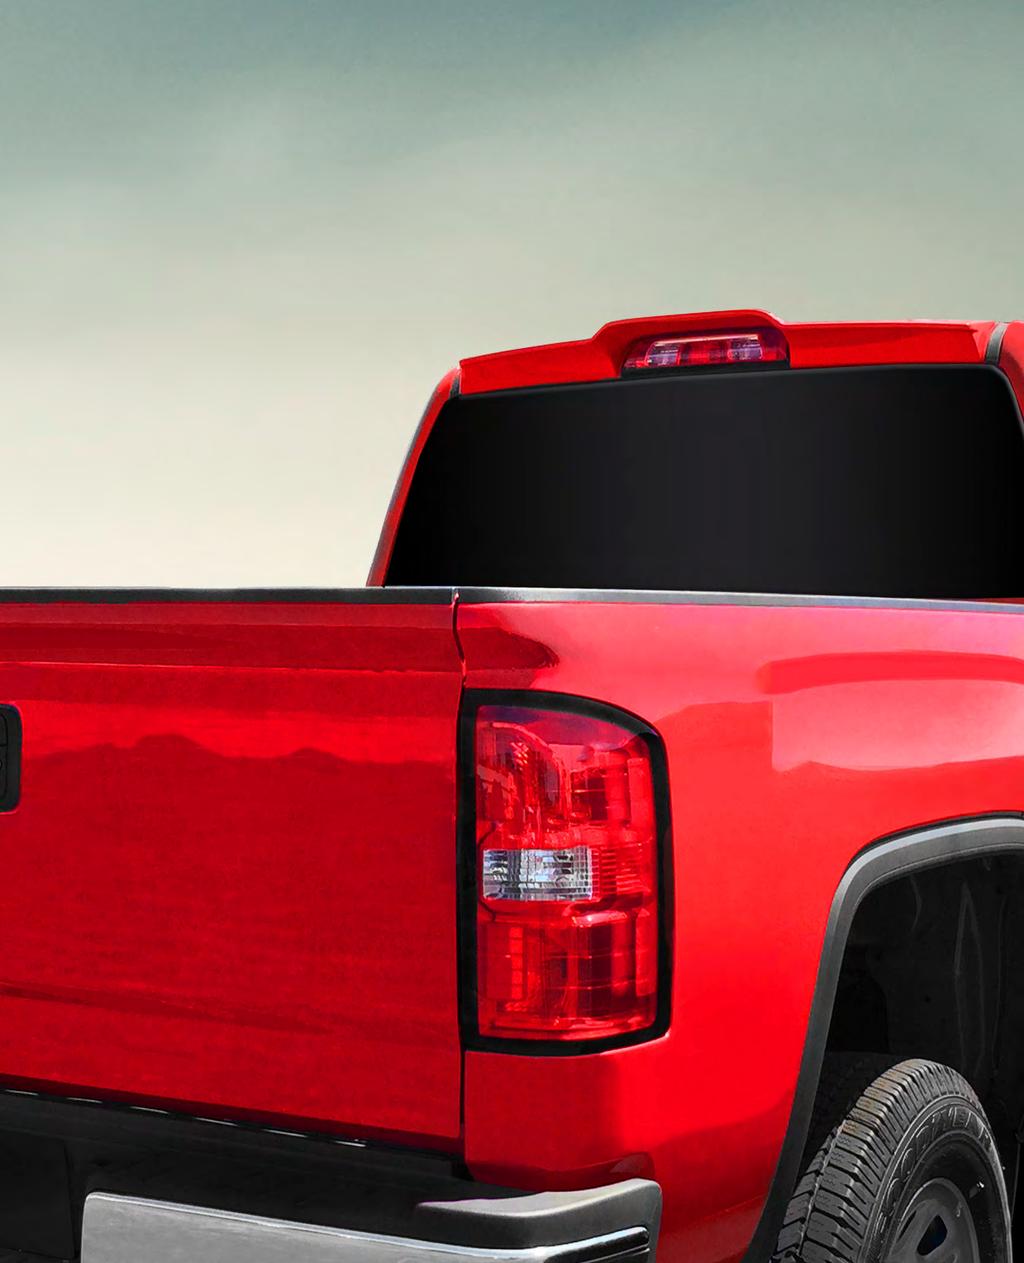 TRUCK CAB SPOILERS Add style and a unique look to your Truck with the installation of a Truck Cab Spoiler from Dawn Enterprises Inc.